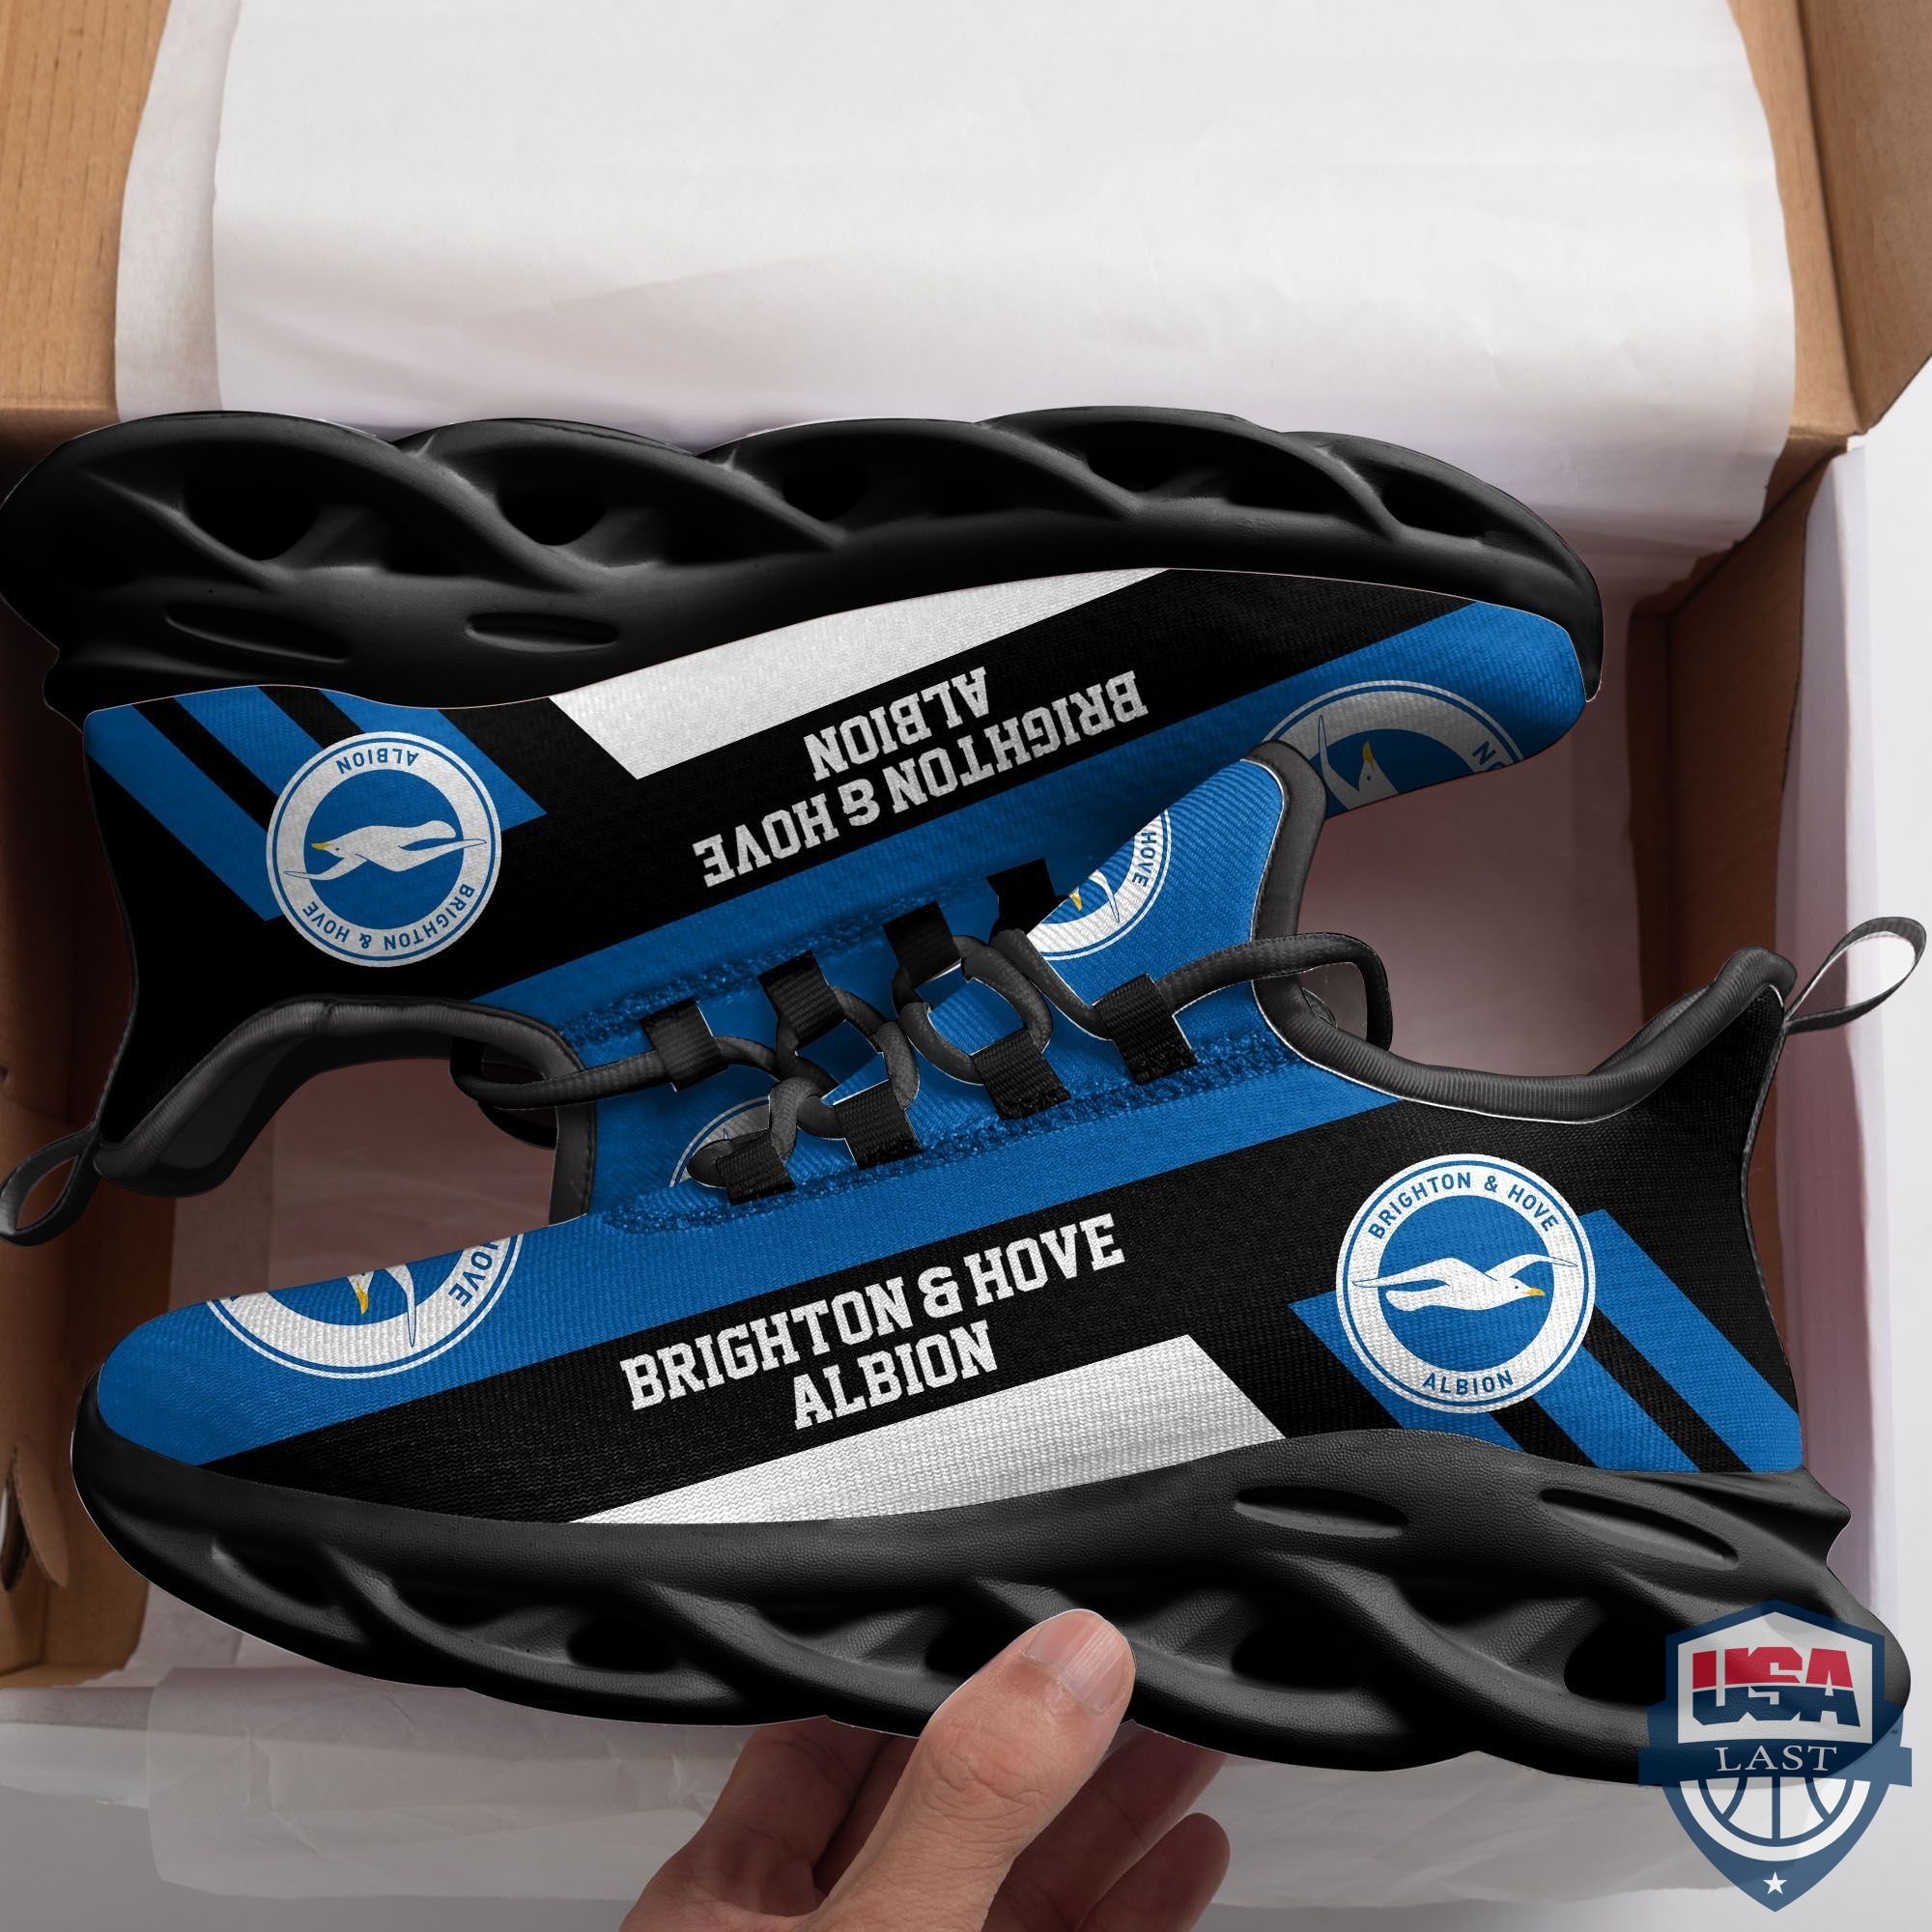 Brighton & Hove Albion FC Max Soul Sneakers Running Sports Shoes